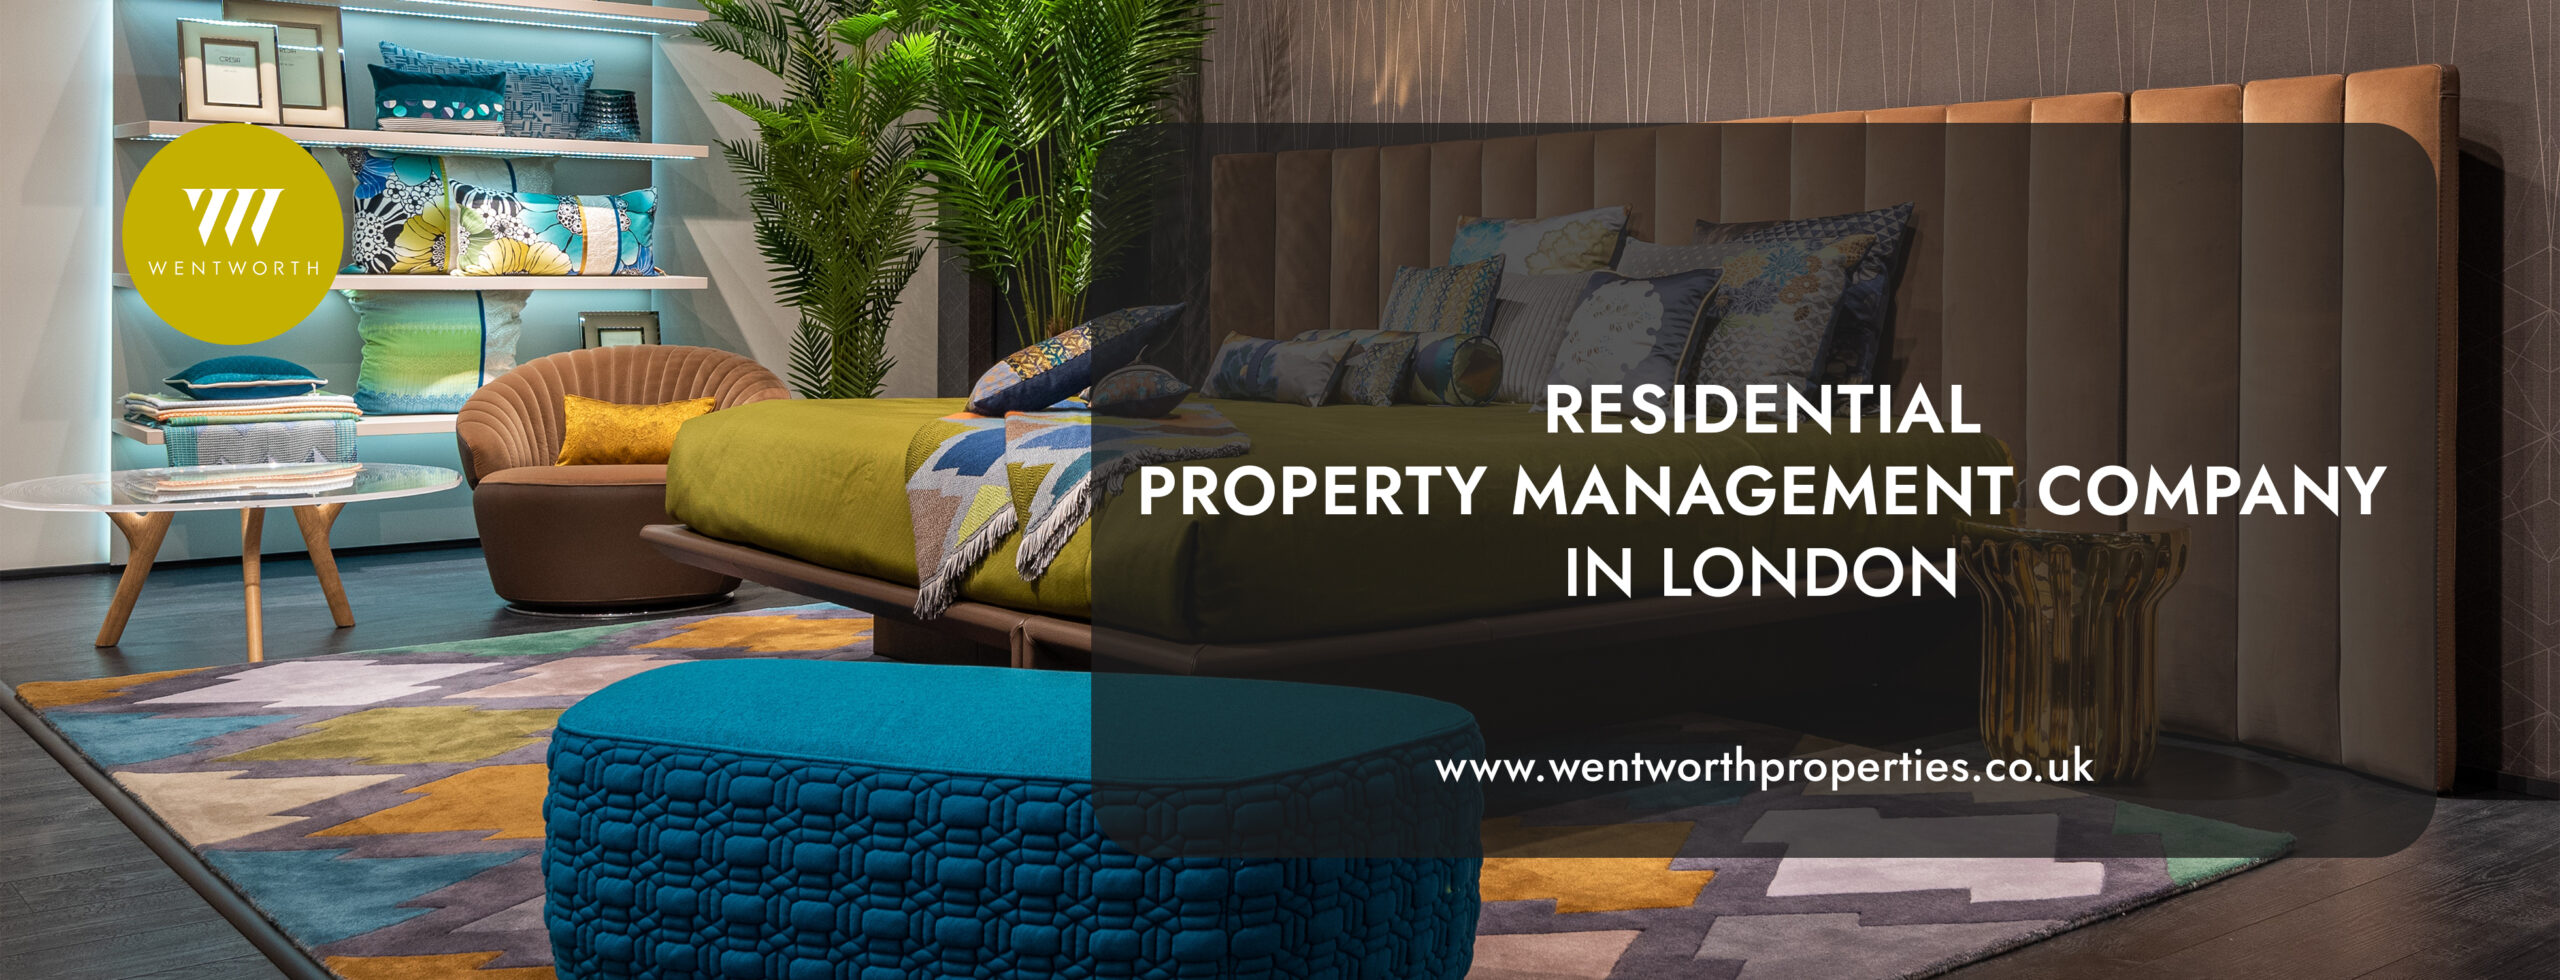 residential property management company in London